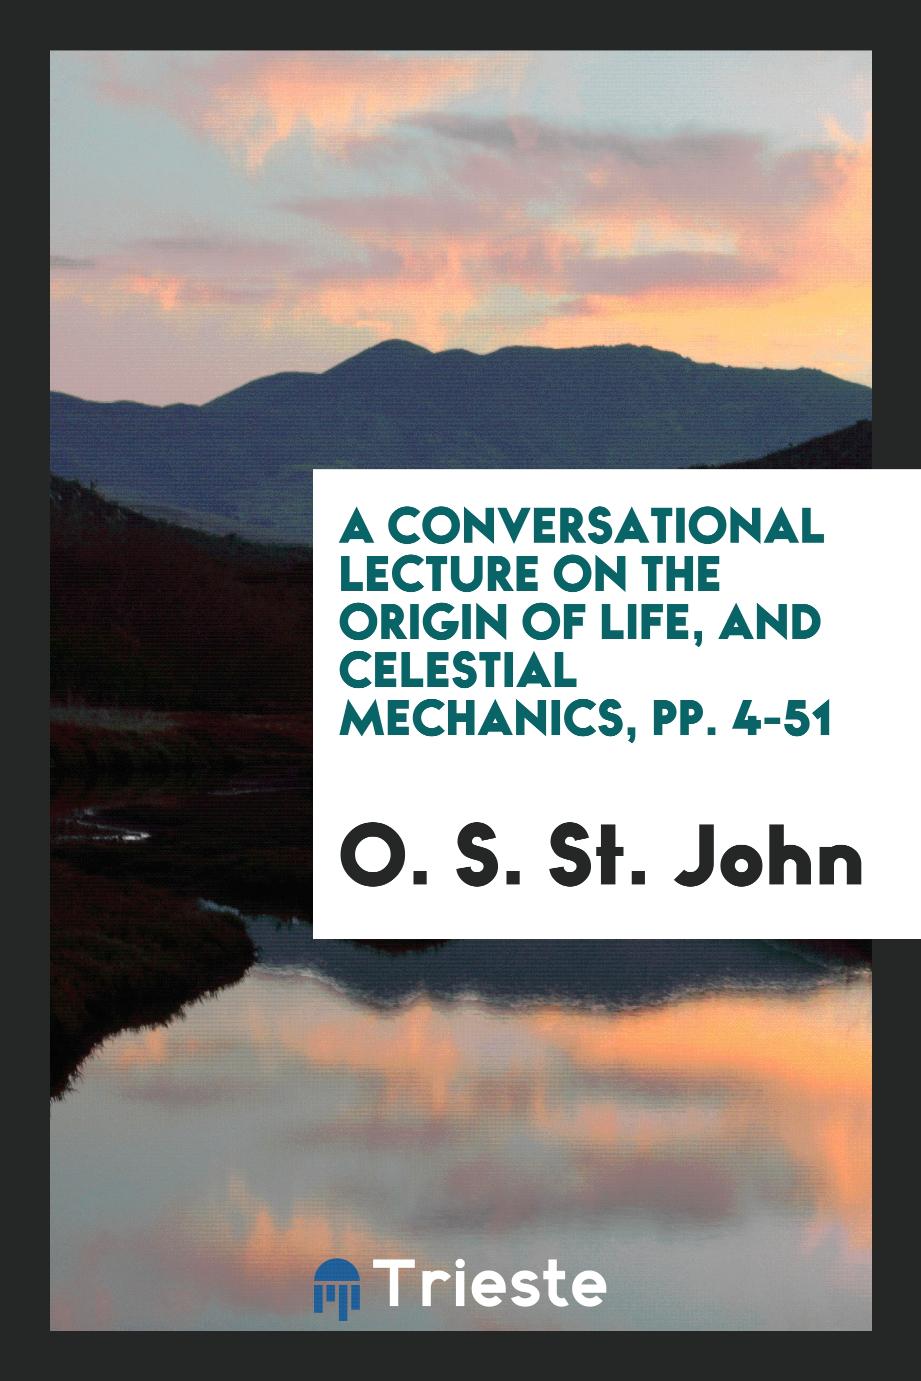 A Conversational Lecture on the Origin of Life, and Celestial Mechanics, pp. 4-51